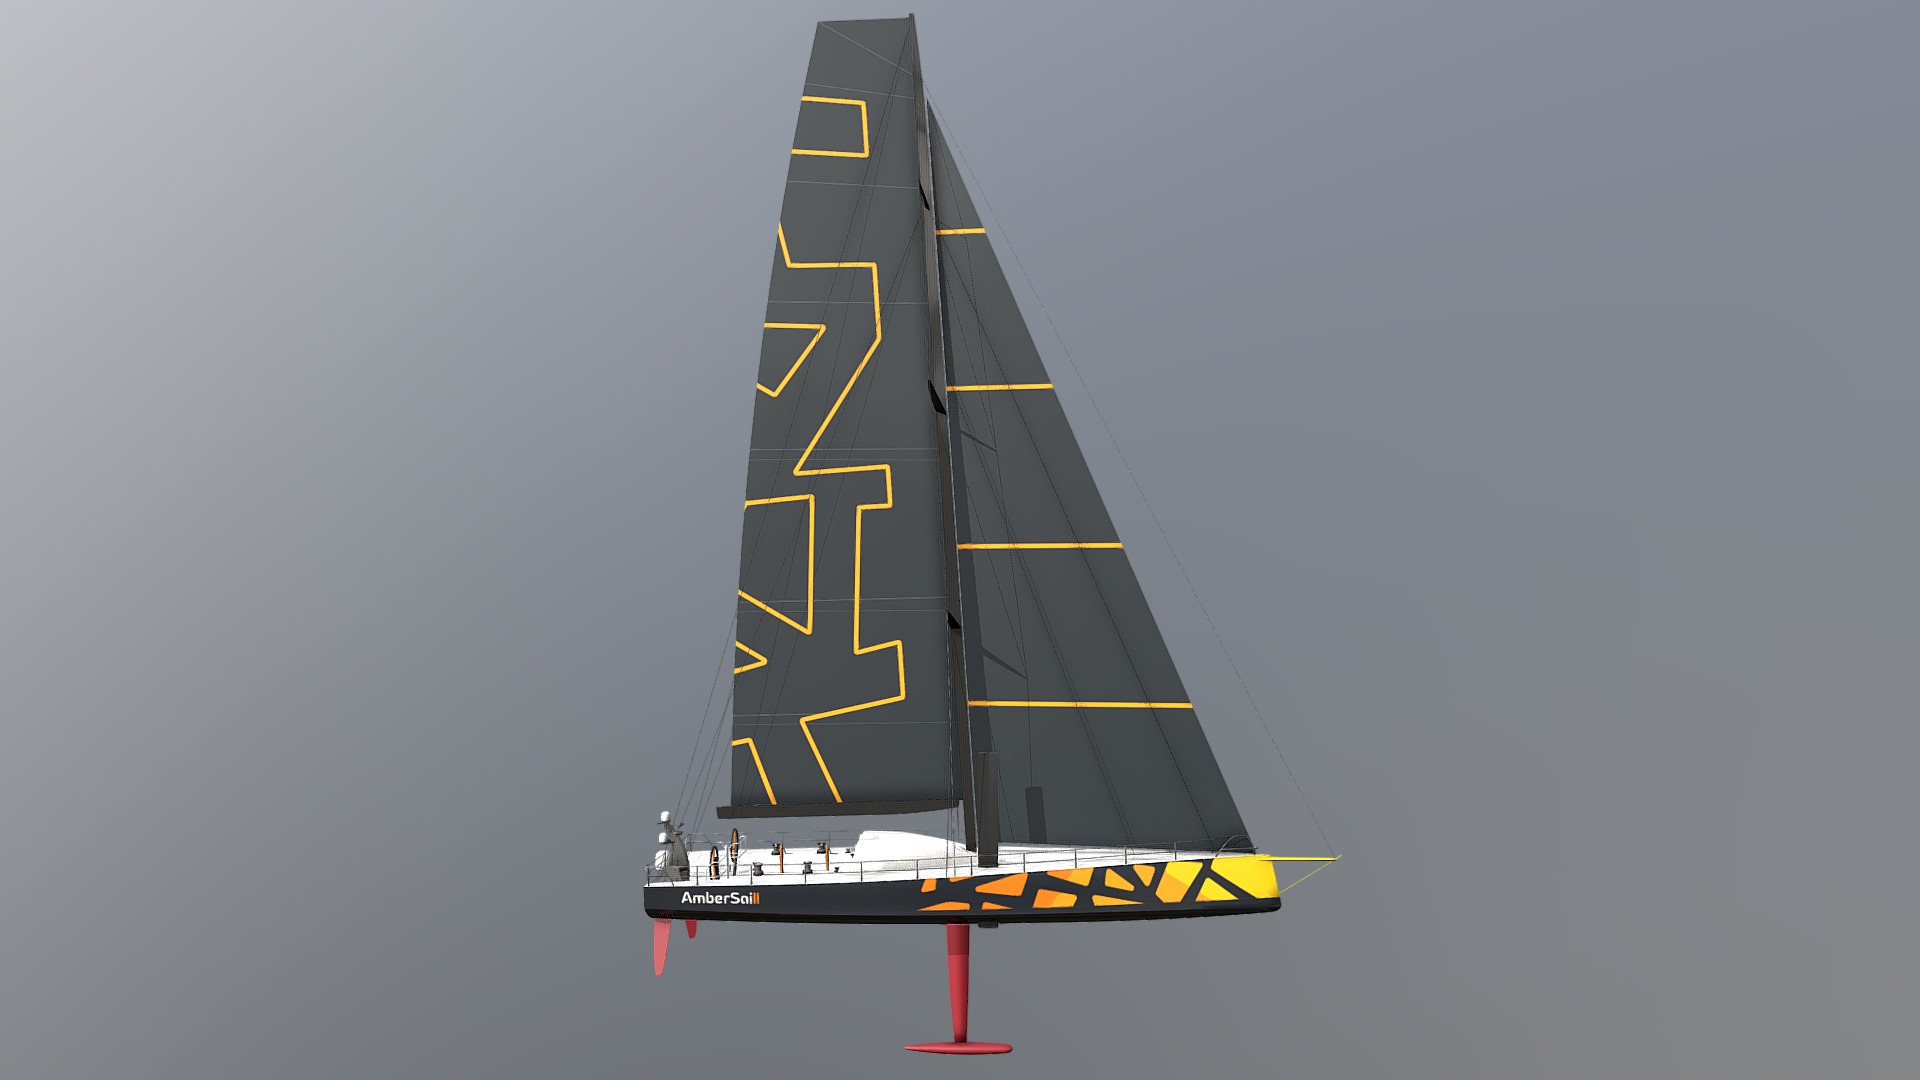 3D model Volvo Ocean 65, Ambersail-Il  LTU 001 - This is a 3D model of the Volvo Ocean 65, Ambersail-Il  LTU 001. The 3D model is about a sailboat in the water.